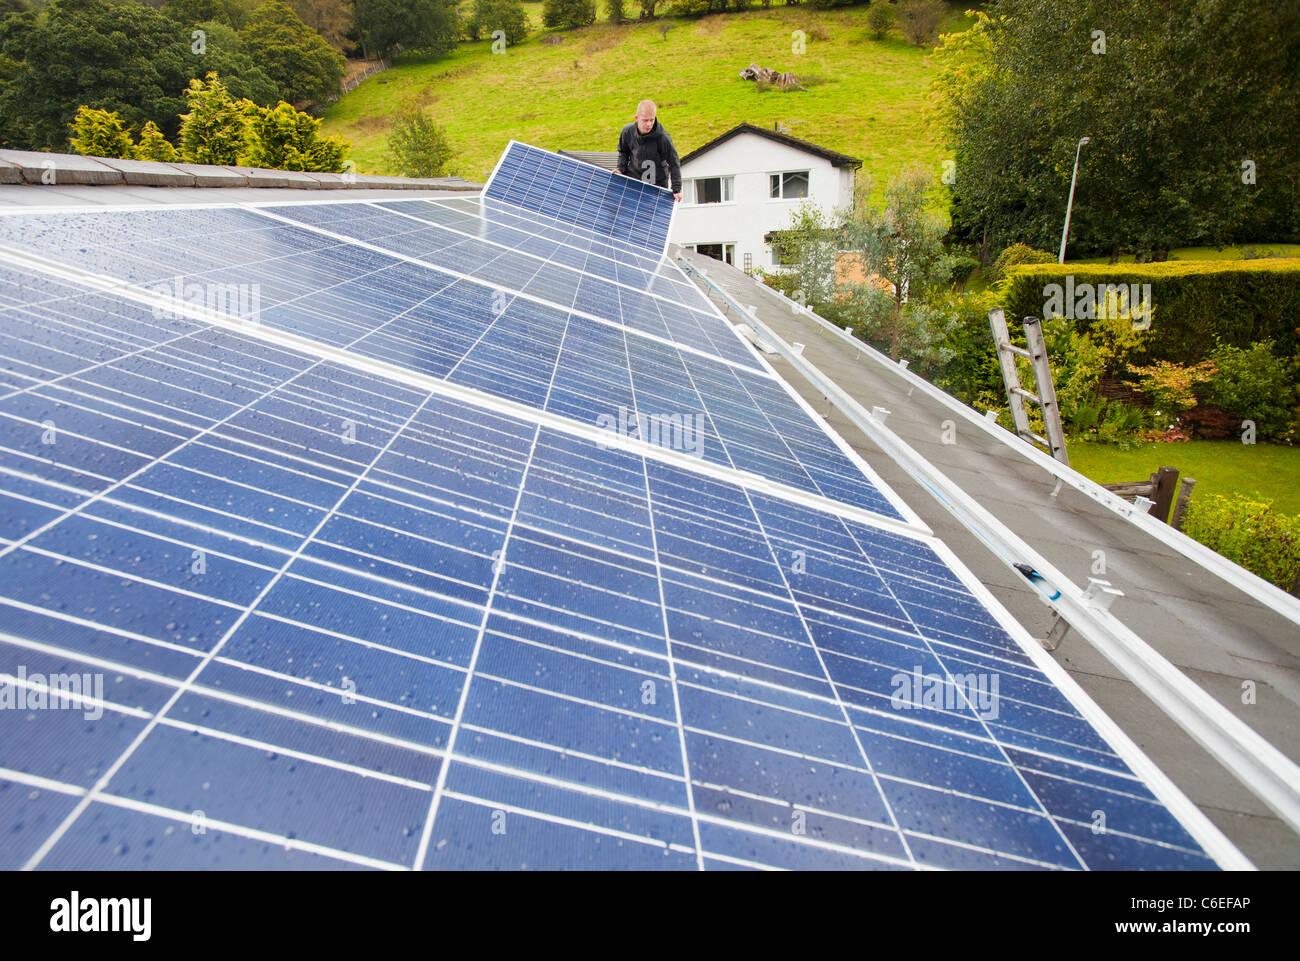 Technicians fitting solar photo voltaic panels to a house roof in Ambleside, Cumbria, UK. Stock Photo